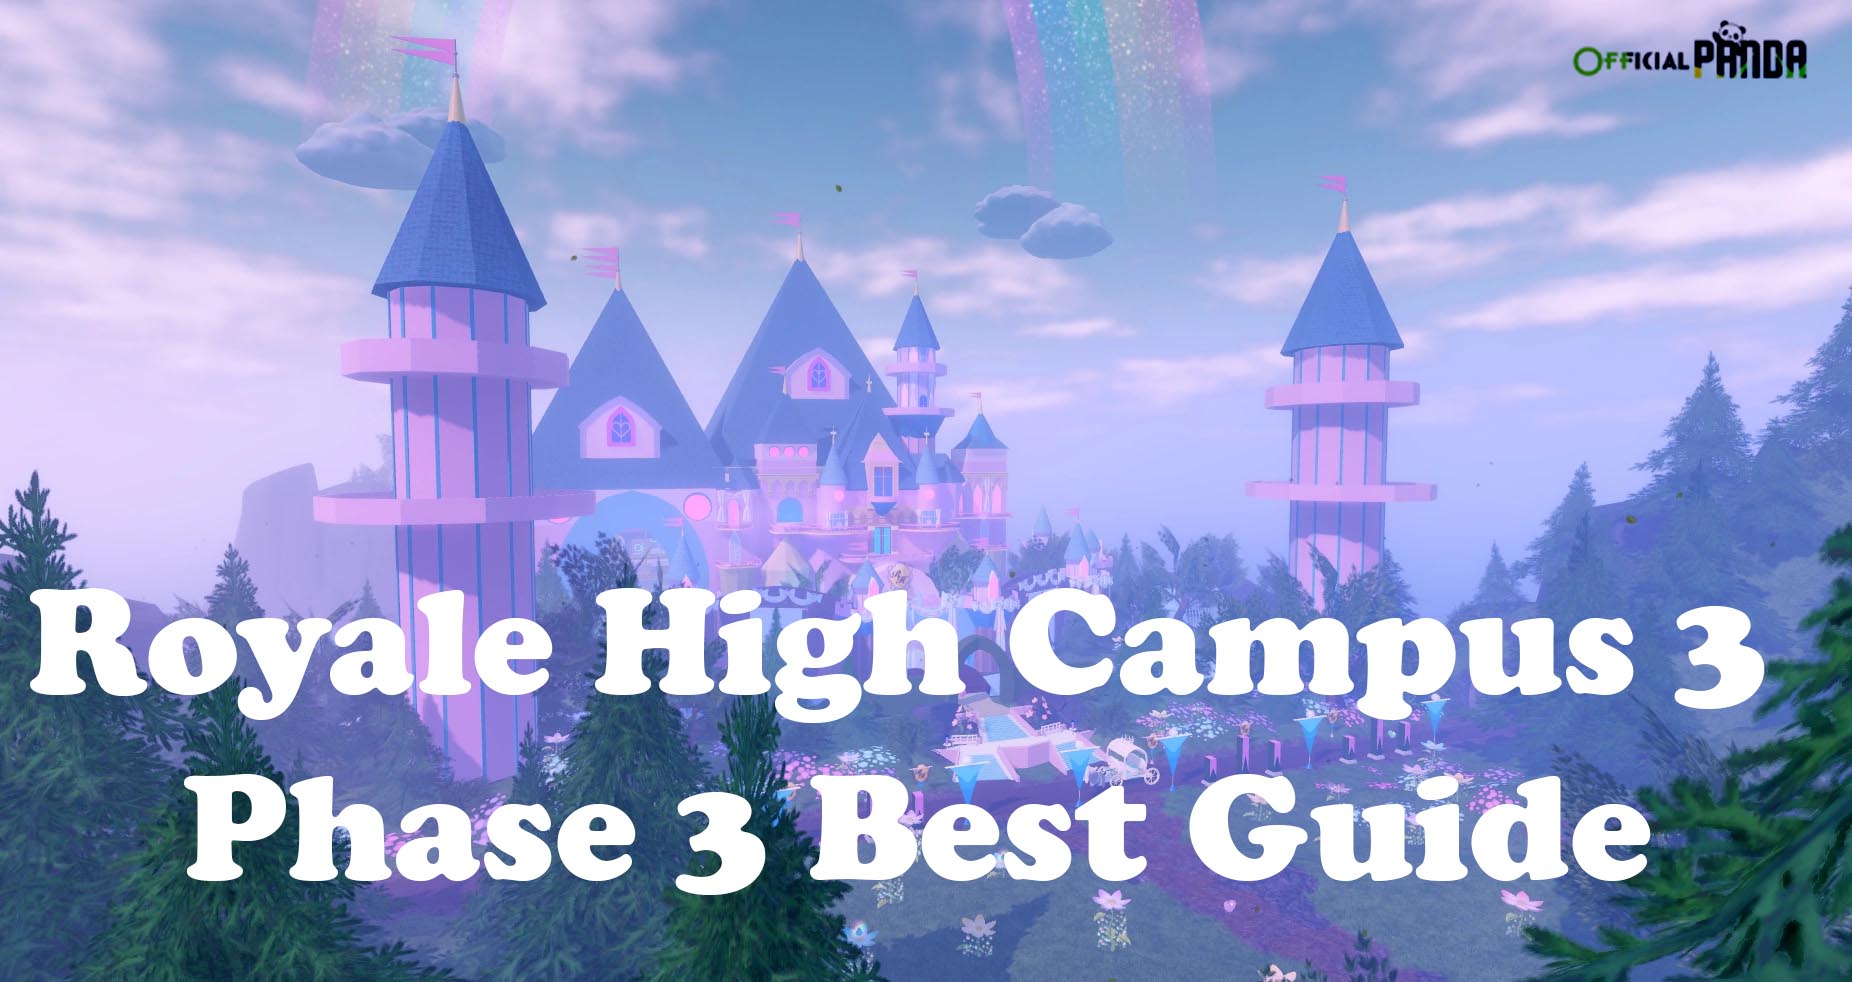 Royale High Campus 3 Phase 3 Best Guide